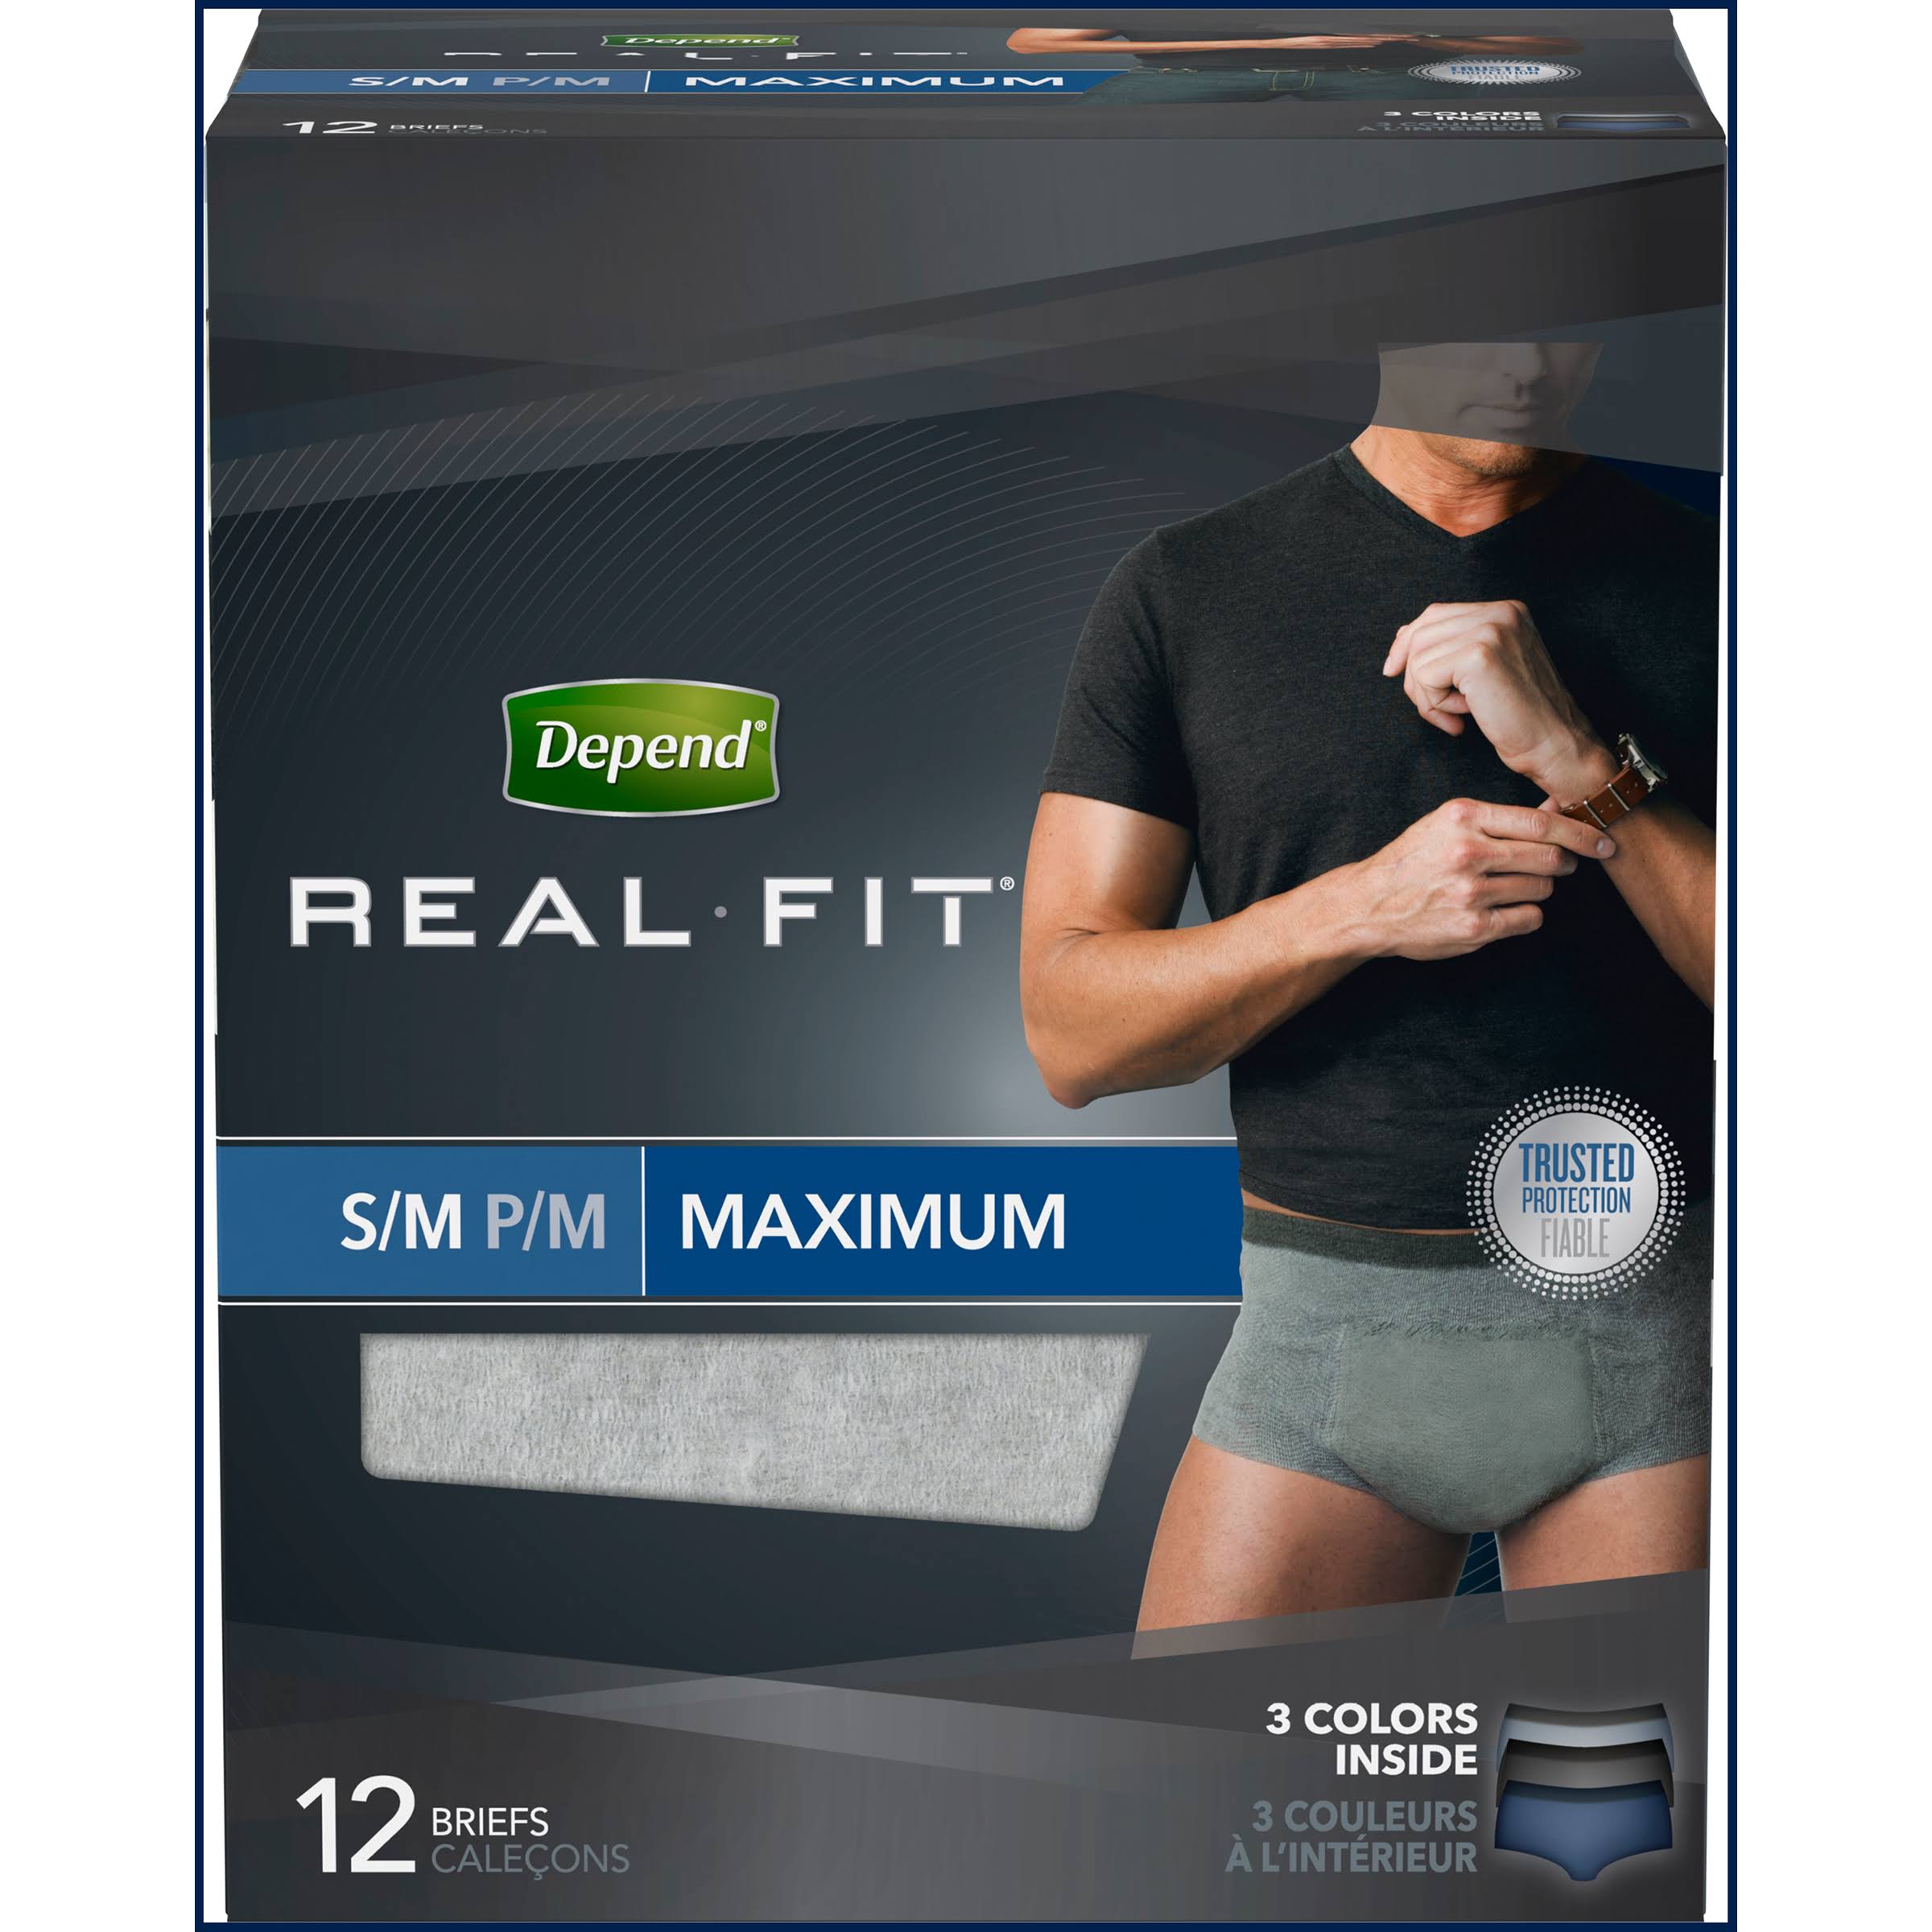 Depend Real Fit for Men Incontinence Briefs - Maximum Absorbency, Small/Medium, 12ct